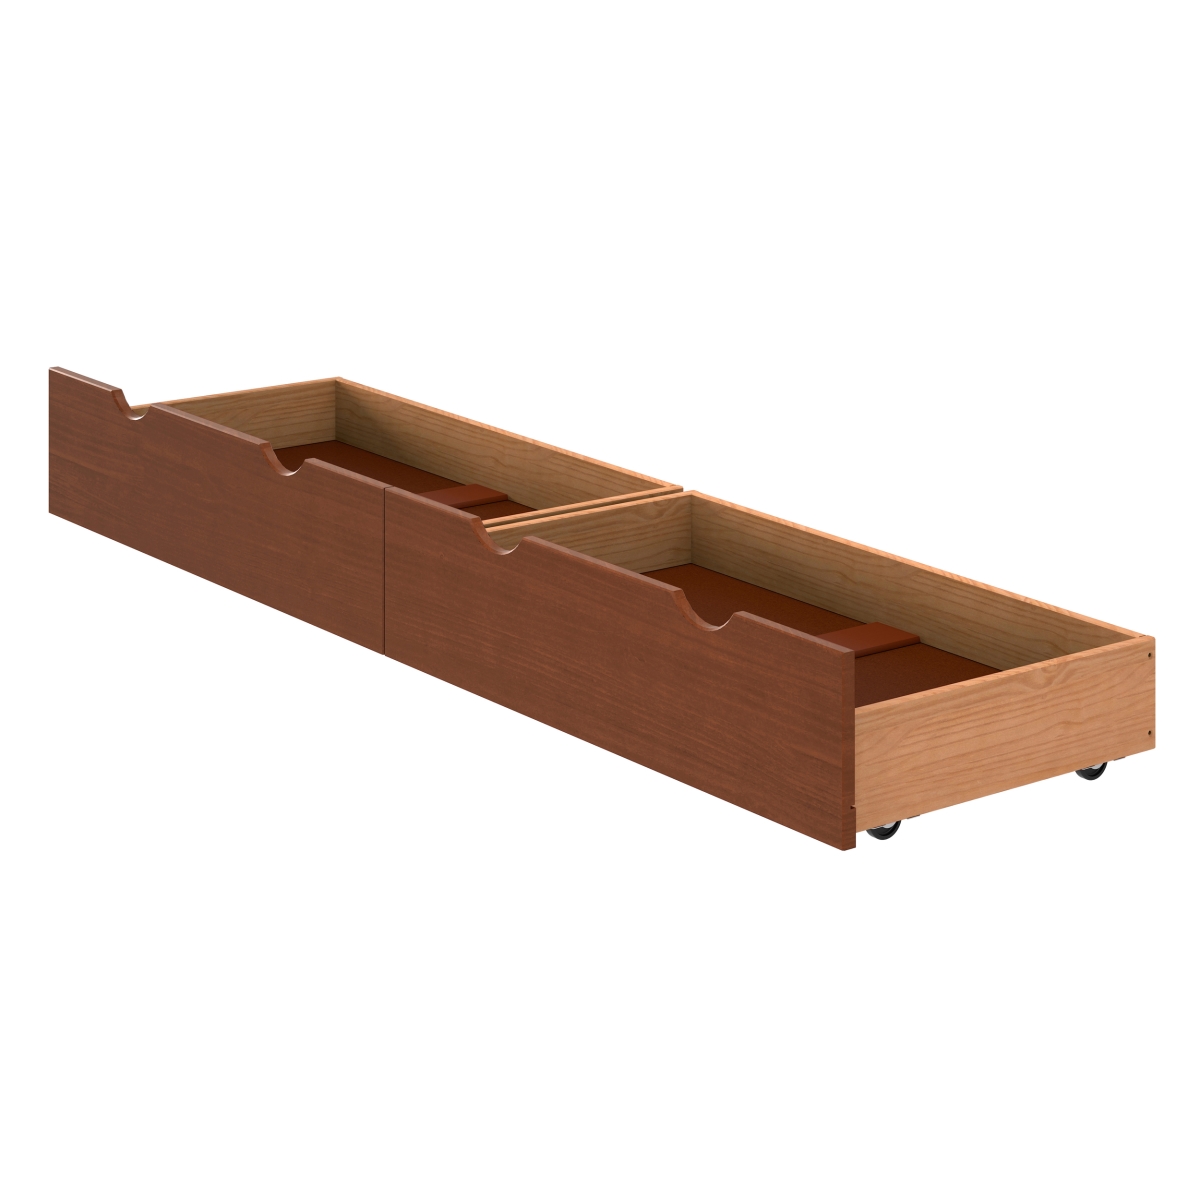 Picture of Alaterre AJ004970 Underbed Storage Drawers, Chestnut - Set of 2